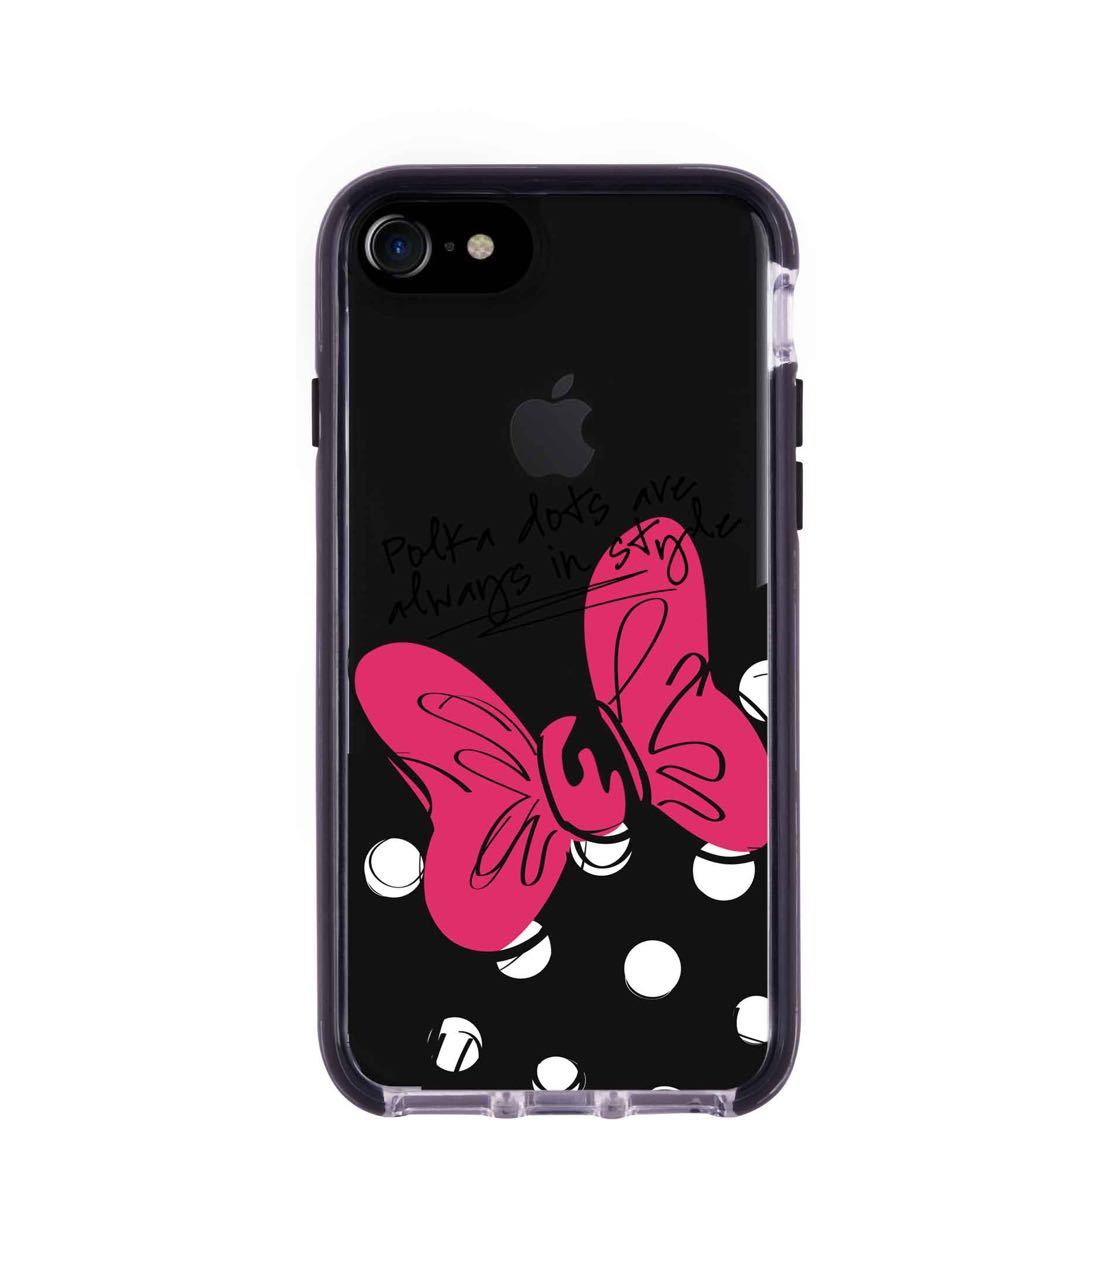 Polka Minnie - Extreme Phone Case for iPhone 7